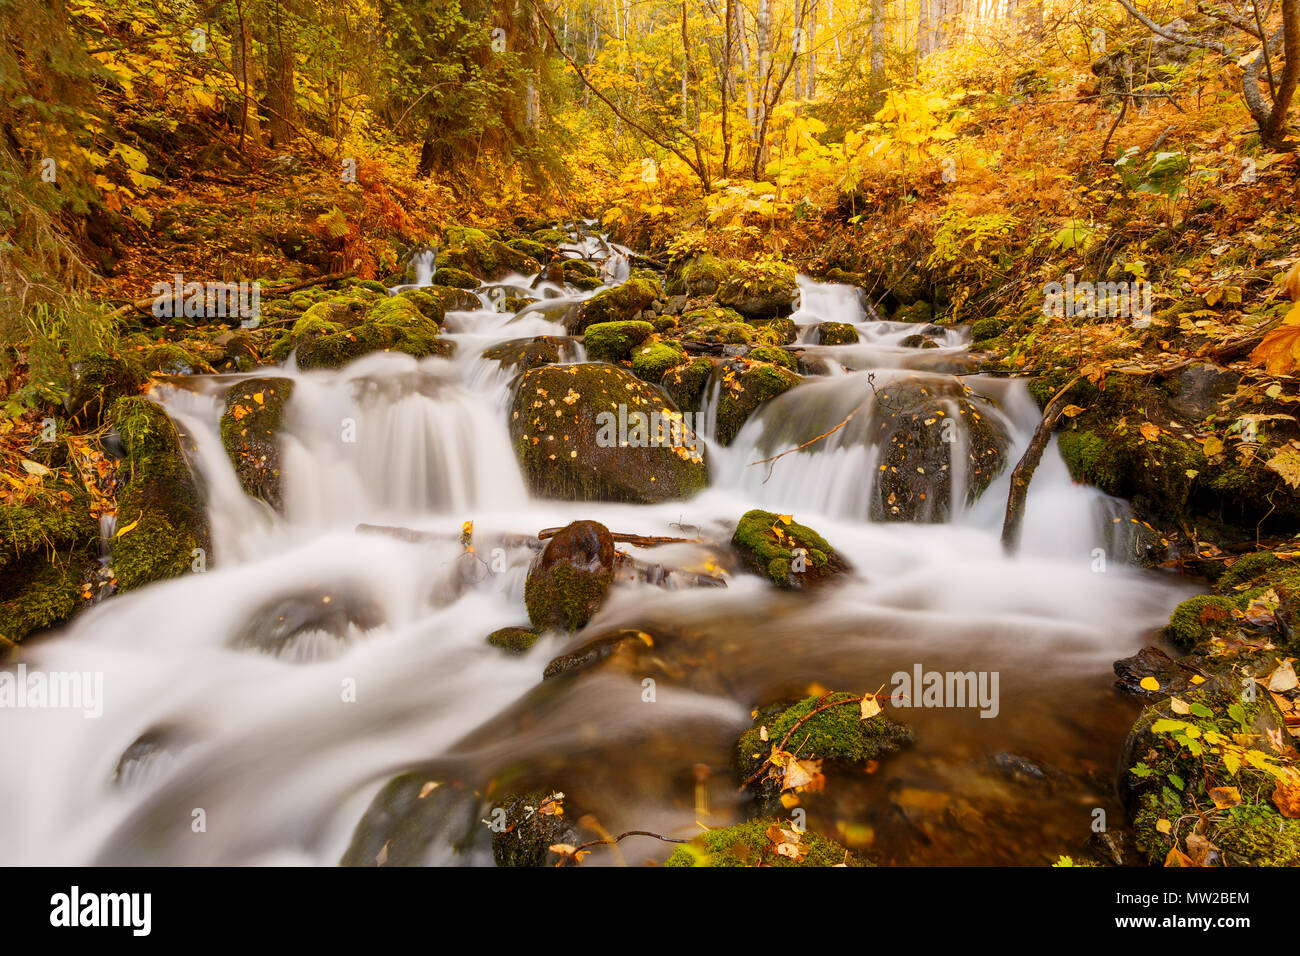 Autumn color along a small stream flowing through a forest in Alaska. Stock Photo